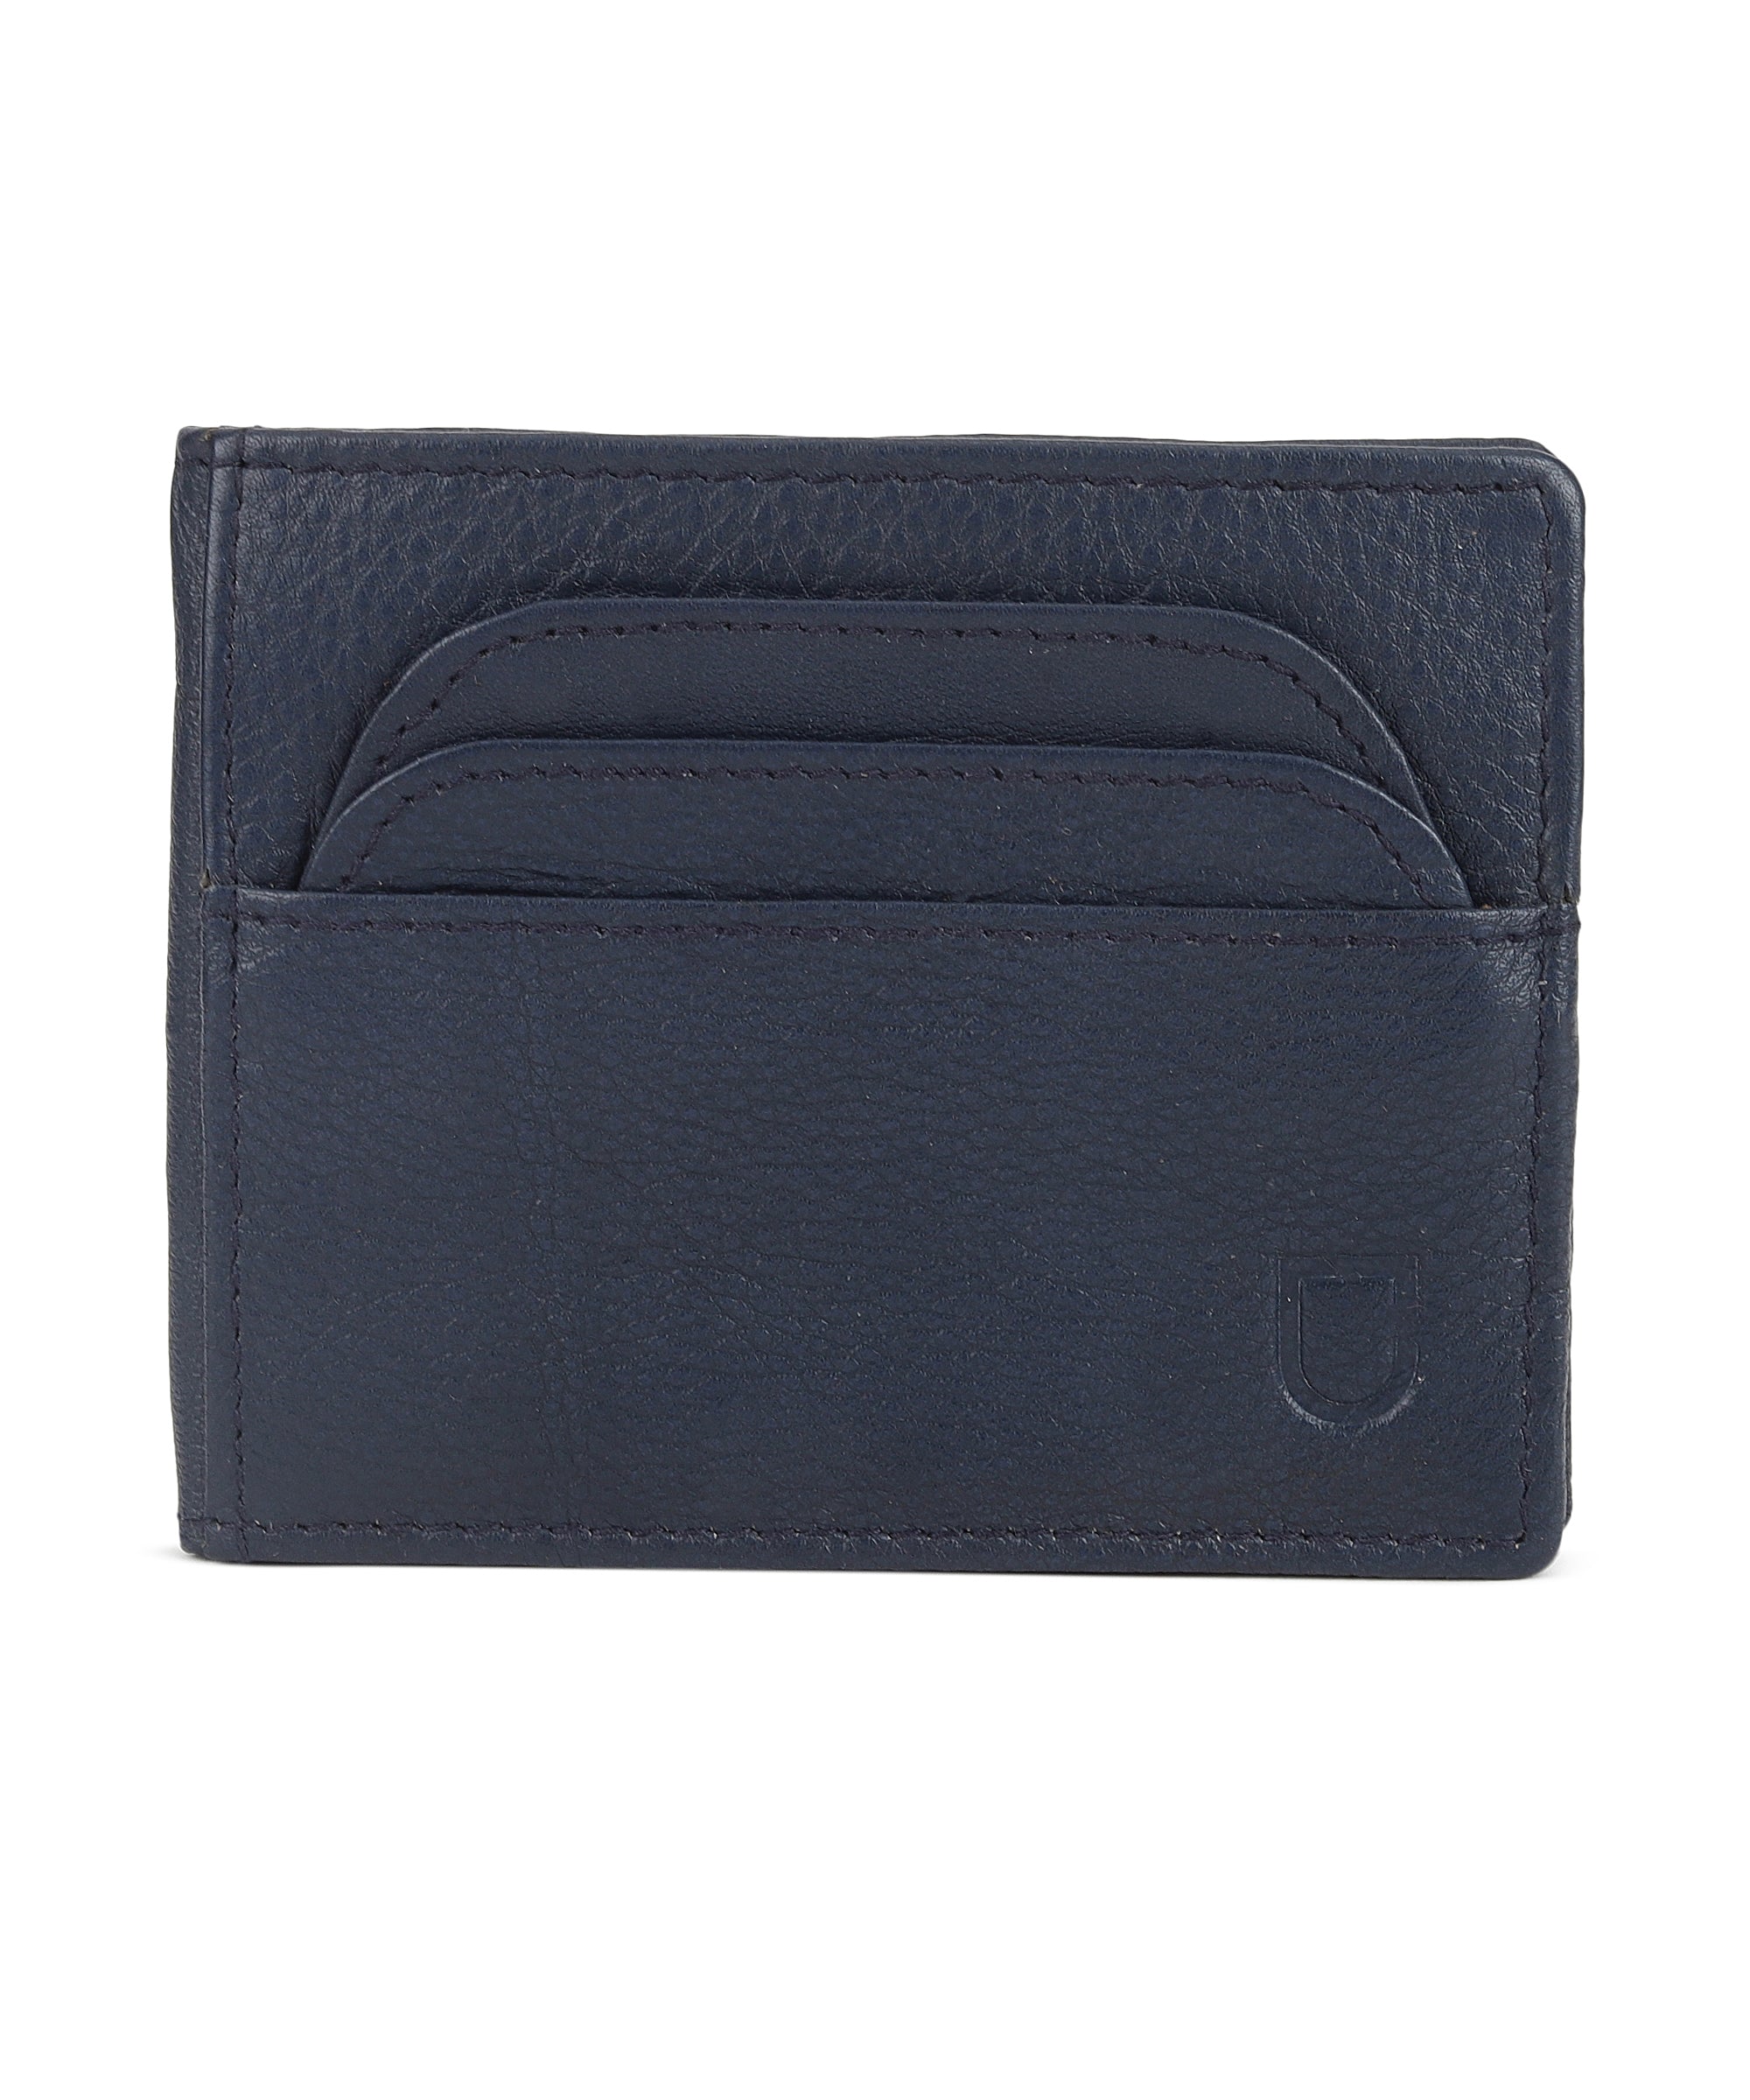 Urbano Fashion Men's Casual, Formal Blue Genuine Leather Wallet-6 Card Slots